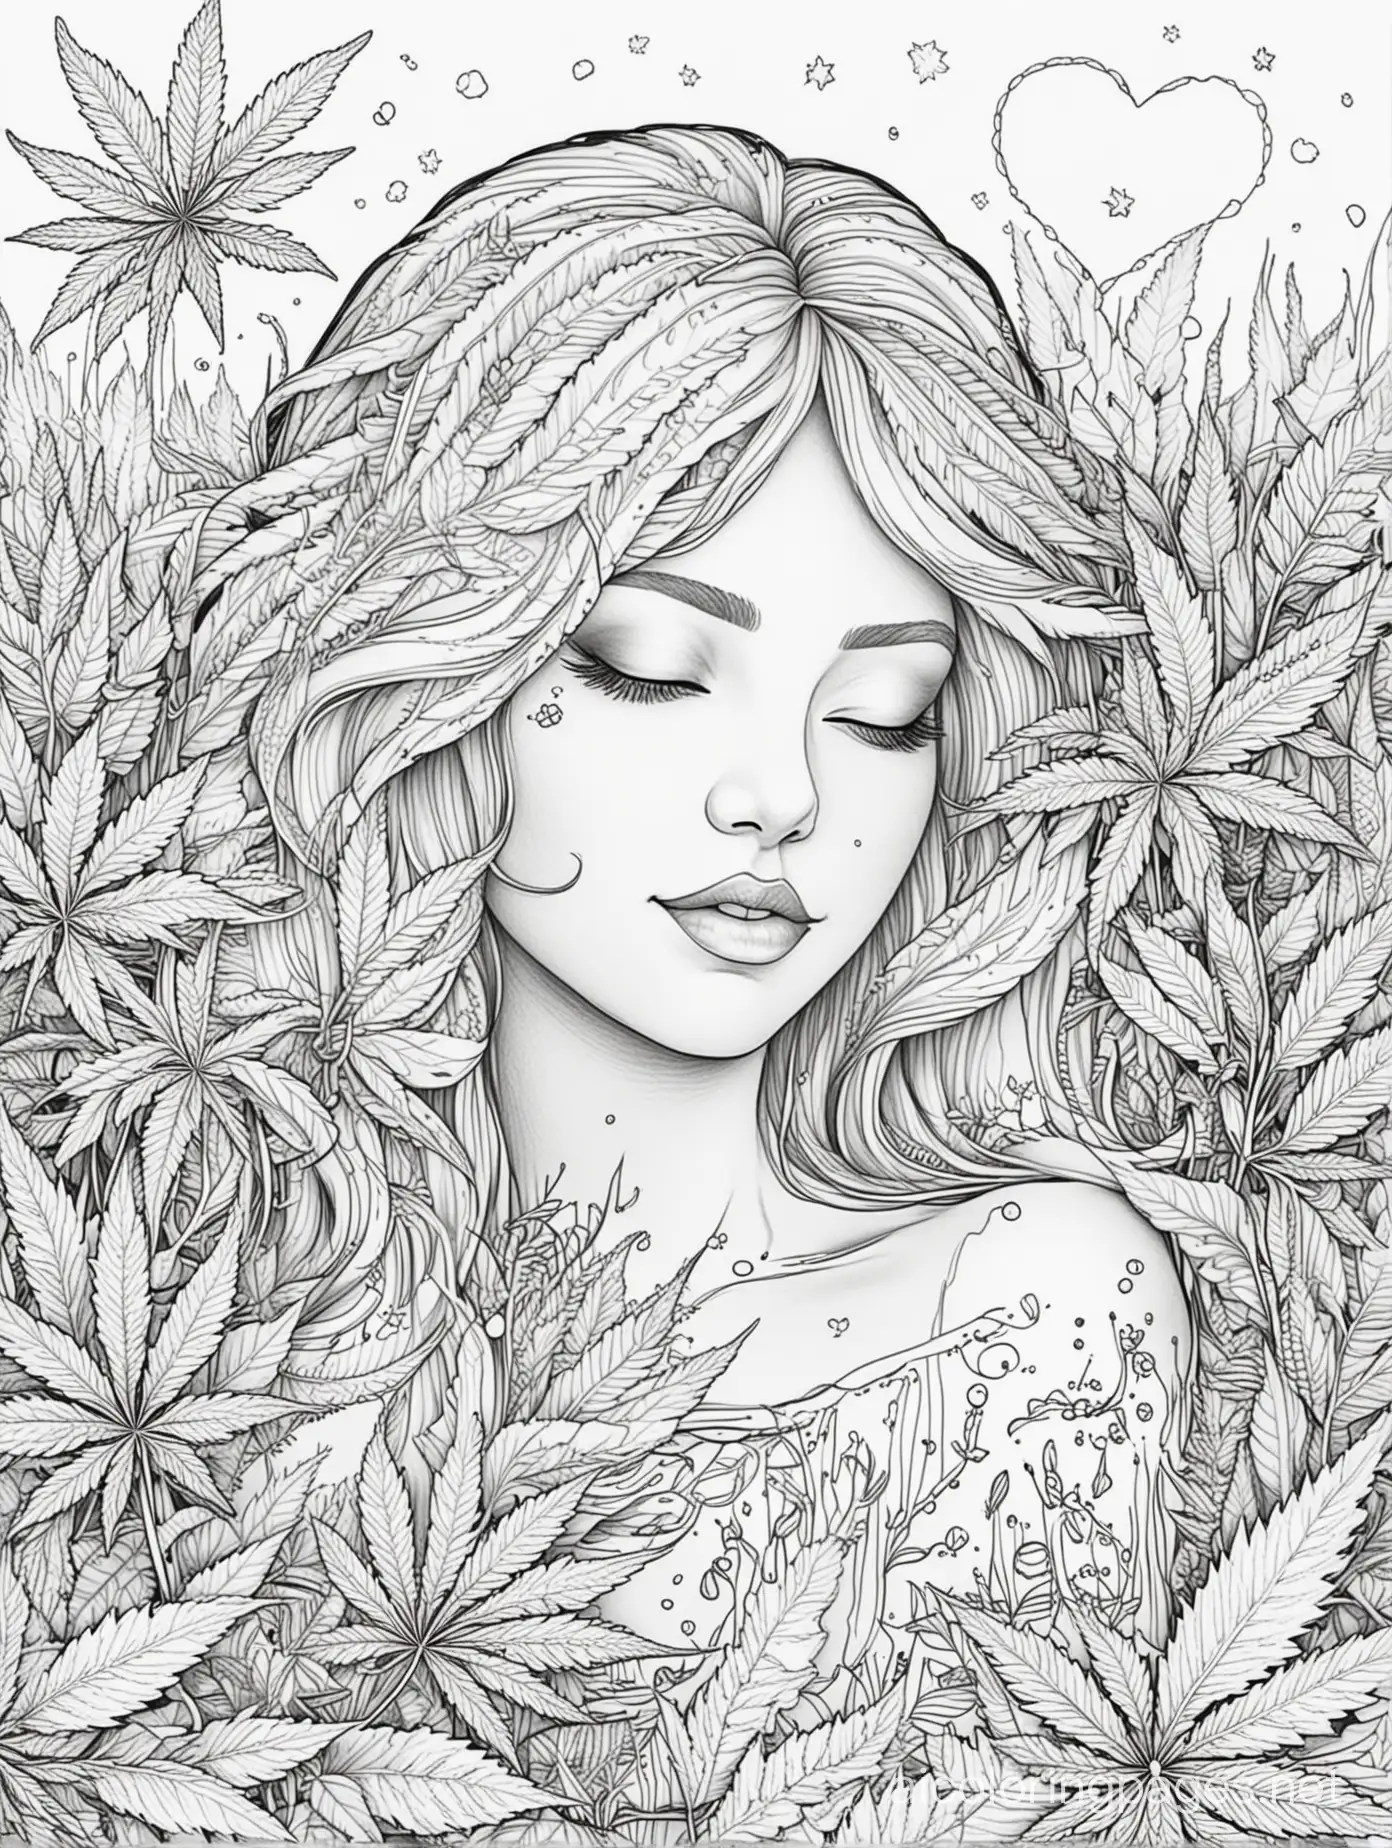 marijuana love fantasy dream, Coloring Page, black and white, line art, white background, Simplicity, Ample White Space. The background of the coloring page is plain white to make it easy for young children to color within the lines. The outlines of all the subjects are easy to distinguish, making it simple for kids to color without too much difficulty